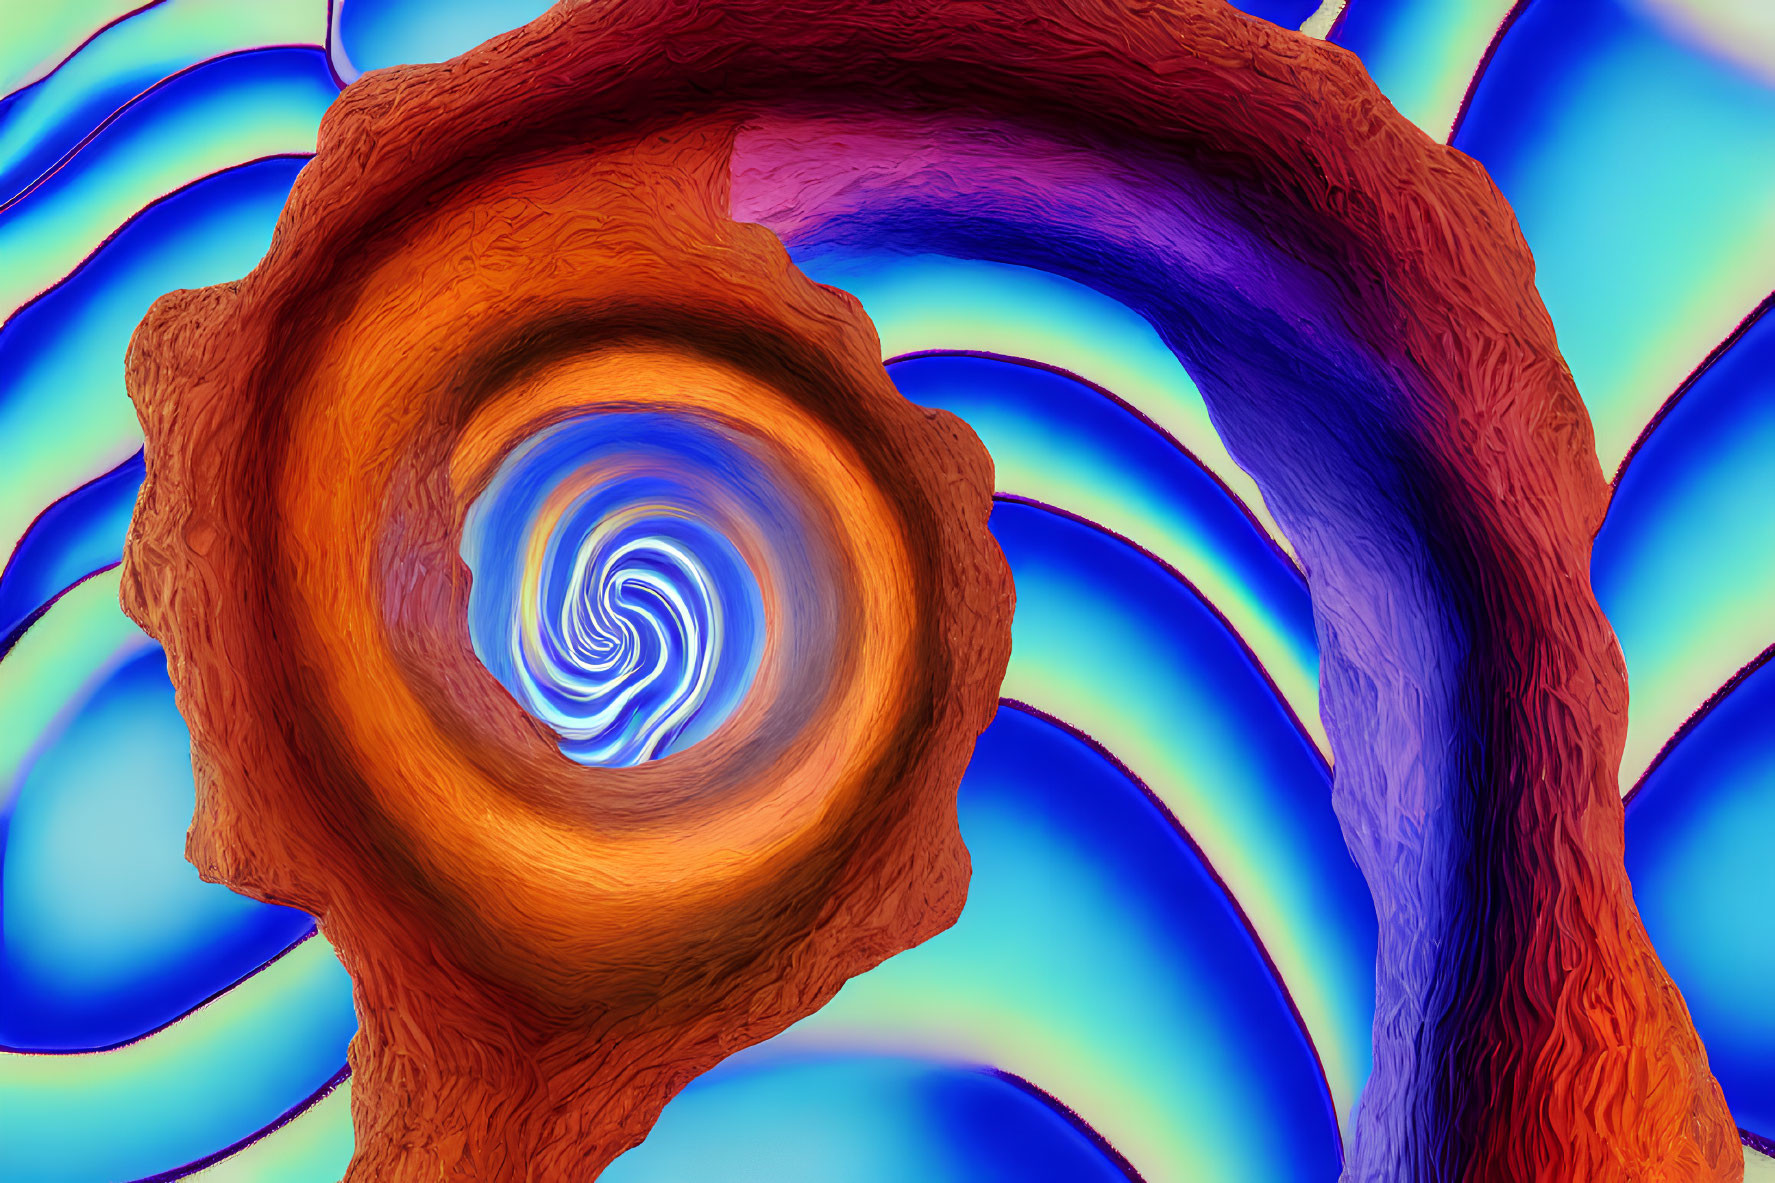 Vivid Blue Swirling Pattern with Orange and Brown Spiral Structure